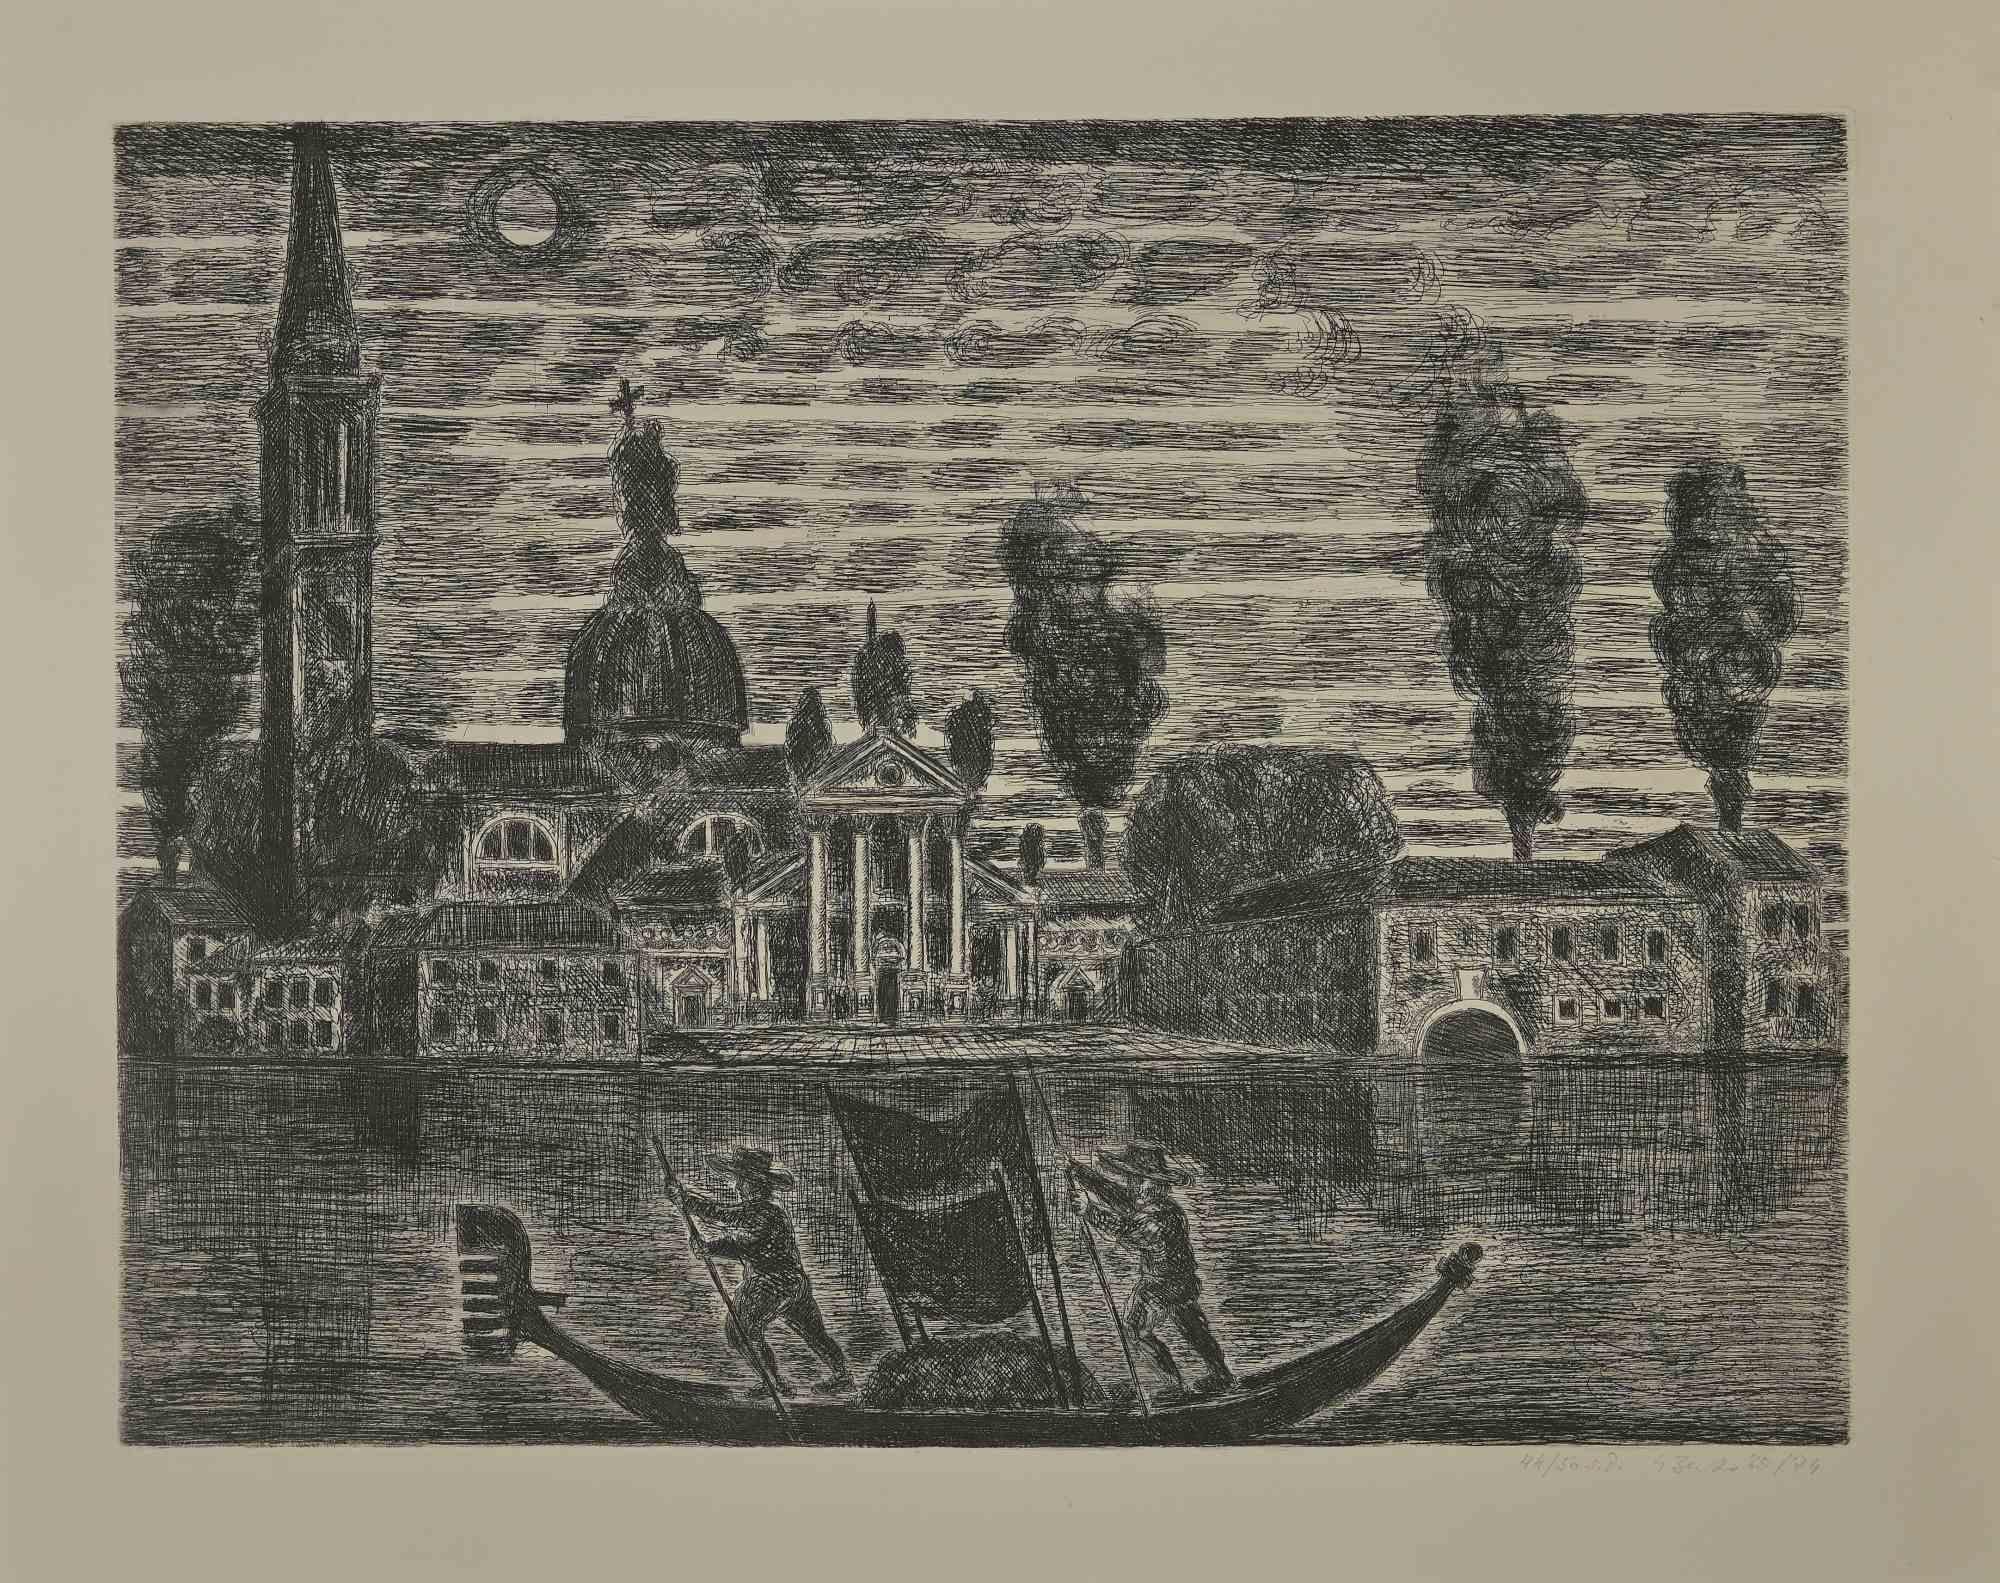 Gondoliers in Venice is an etching realized by Gianpaolo Berto in 1974.

60 X 75 cm, no frame.

Edition 44/50. Numbered and firmed by the artist in the lower margin.

Good conditions.

 

Gianpaolo Berto (1940) was born and raised in the